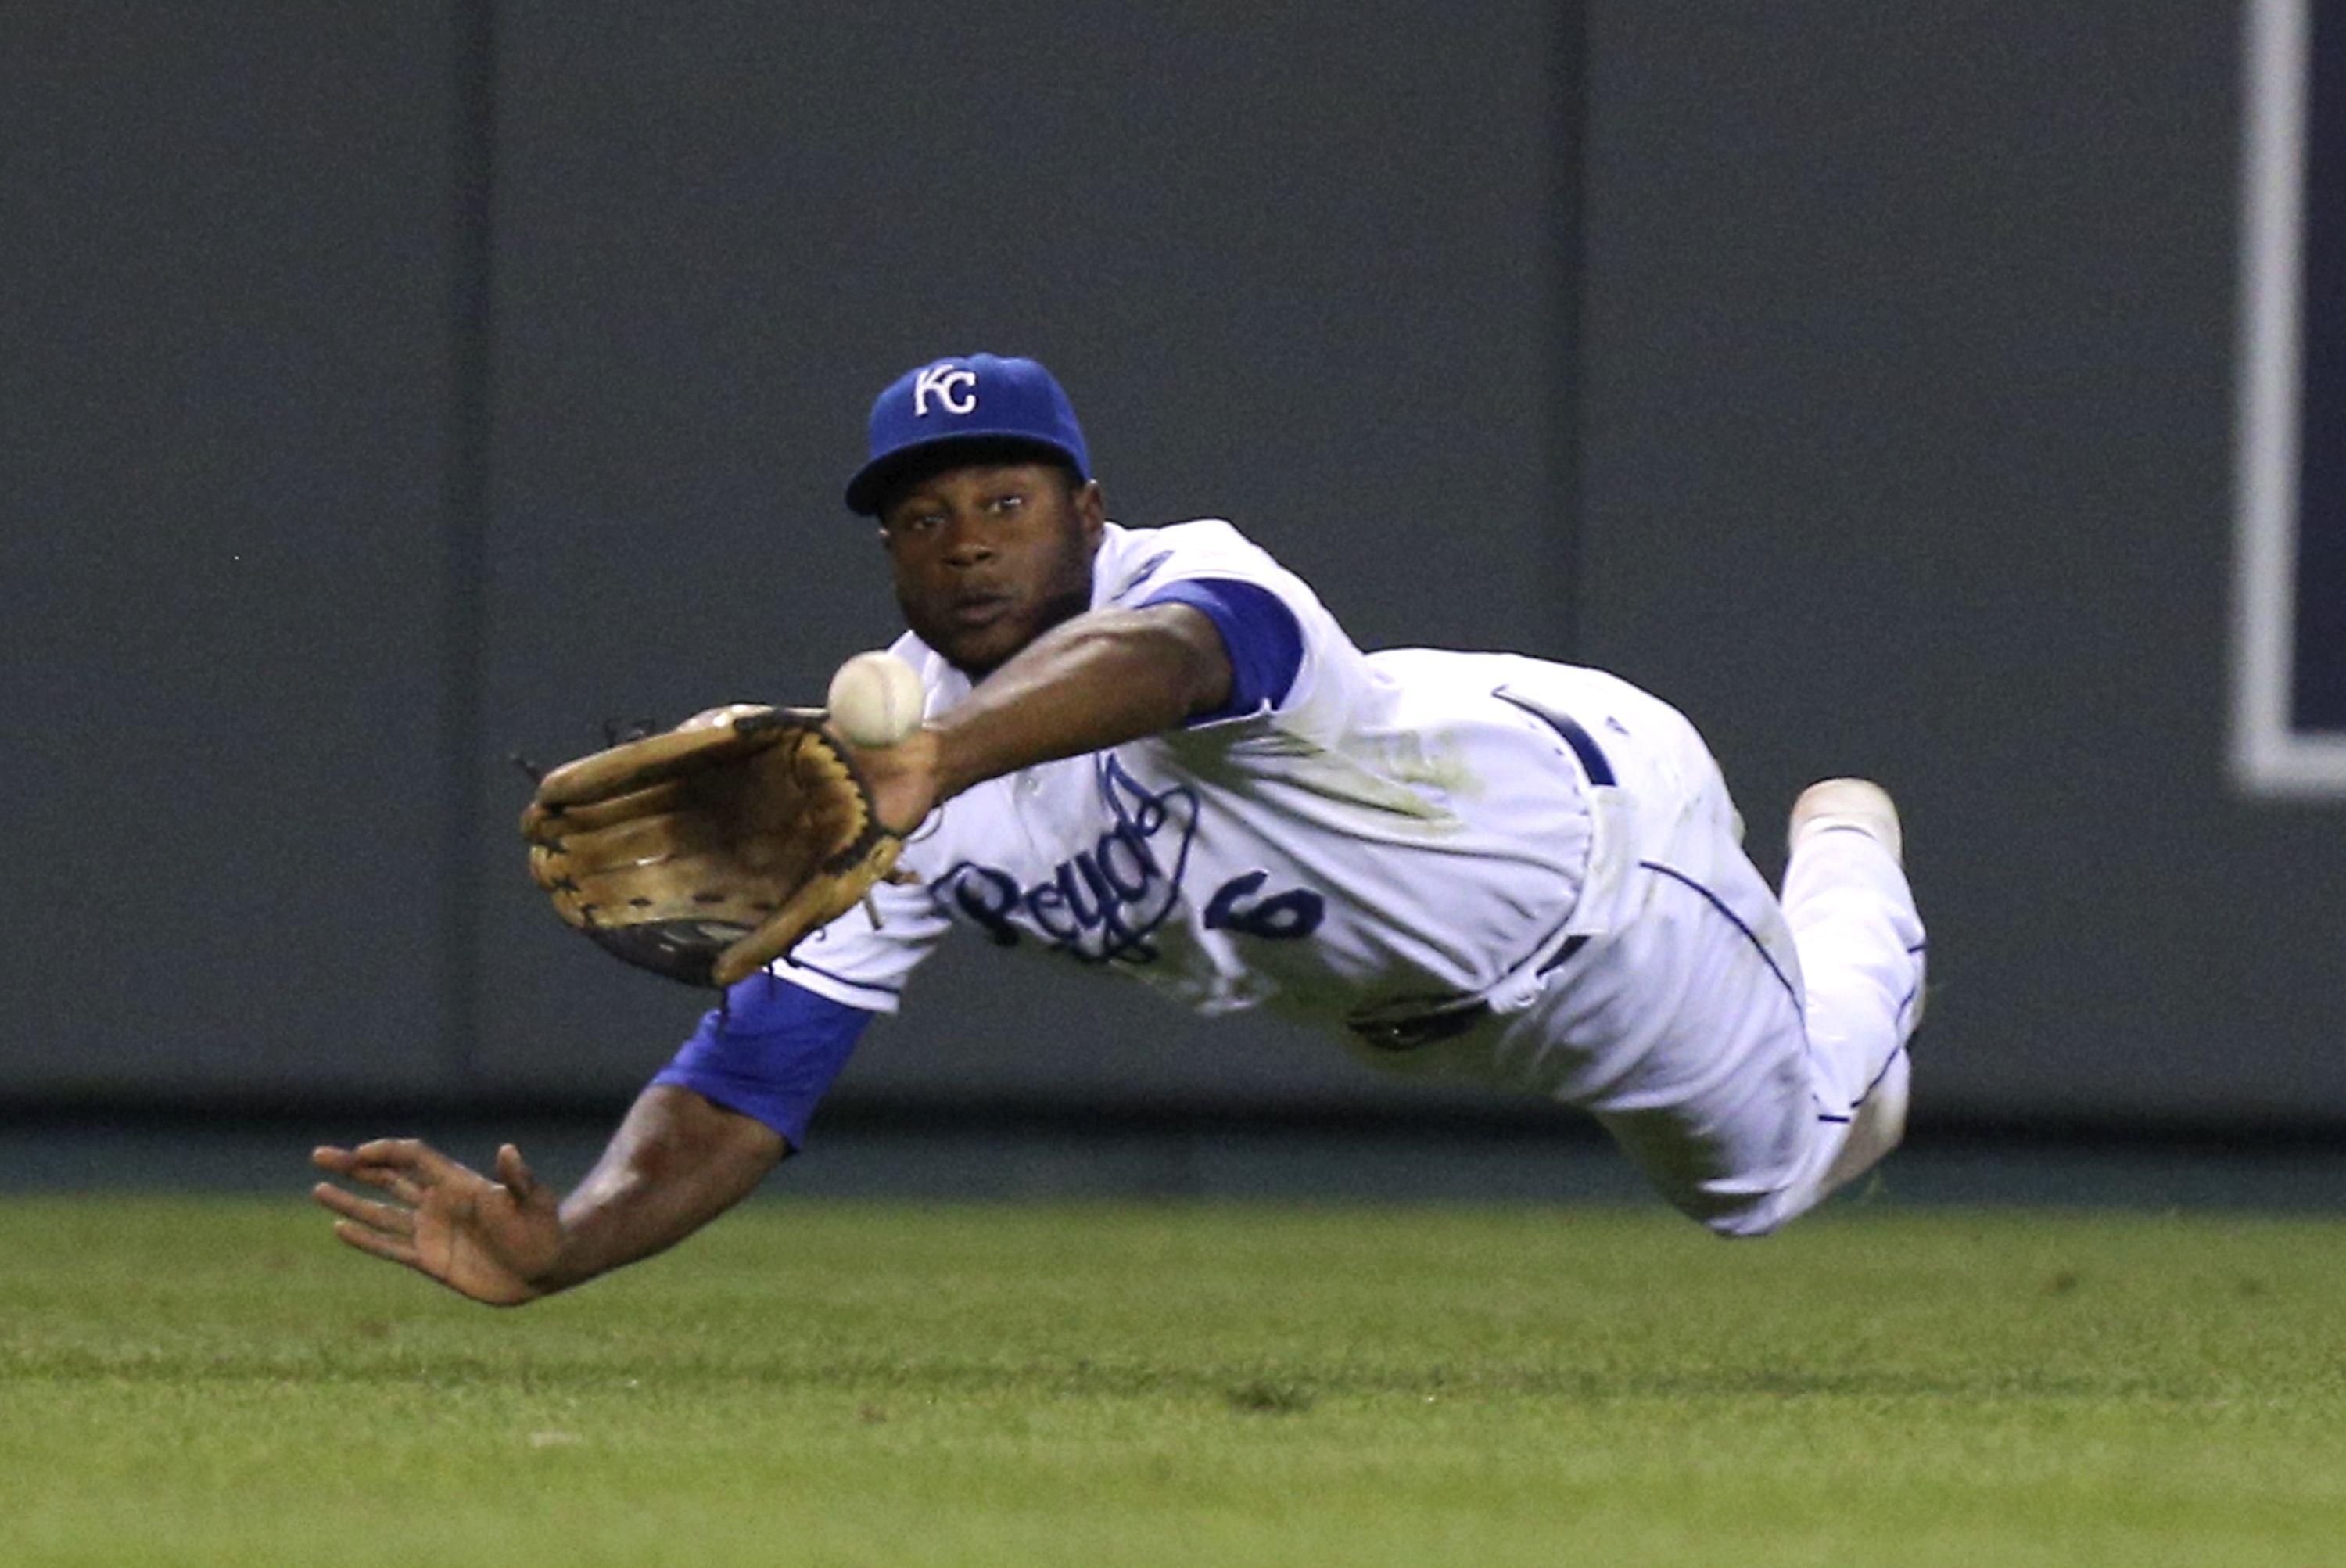 Are You Falling in Love with the Kansas City Royals Yet?